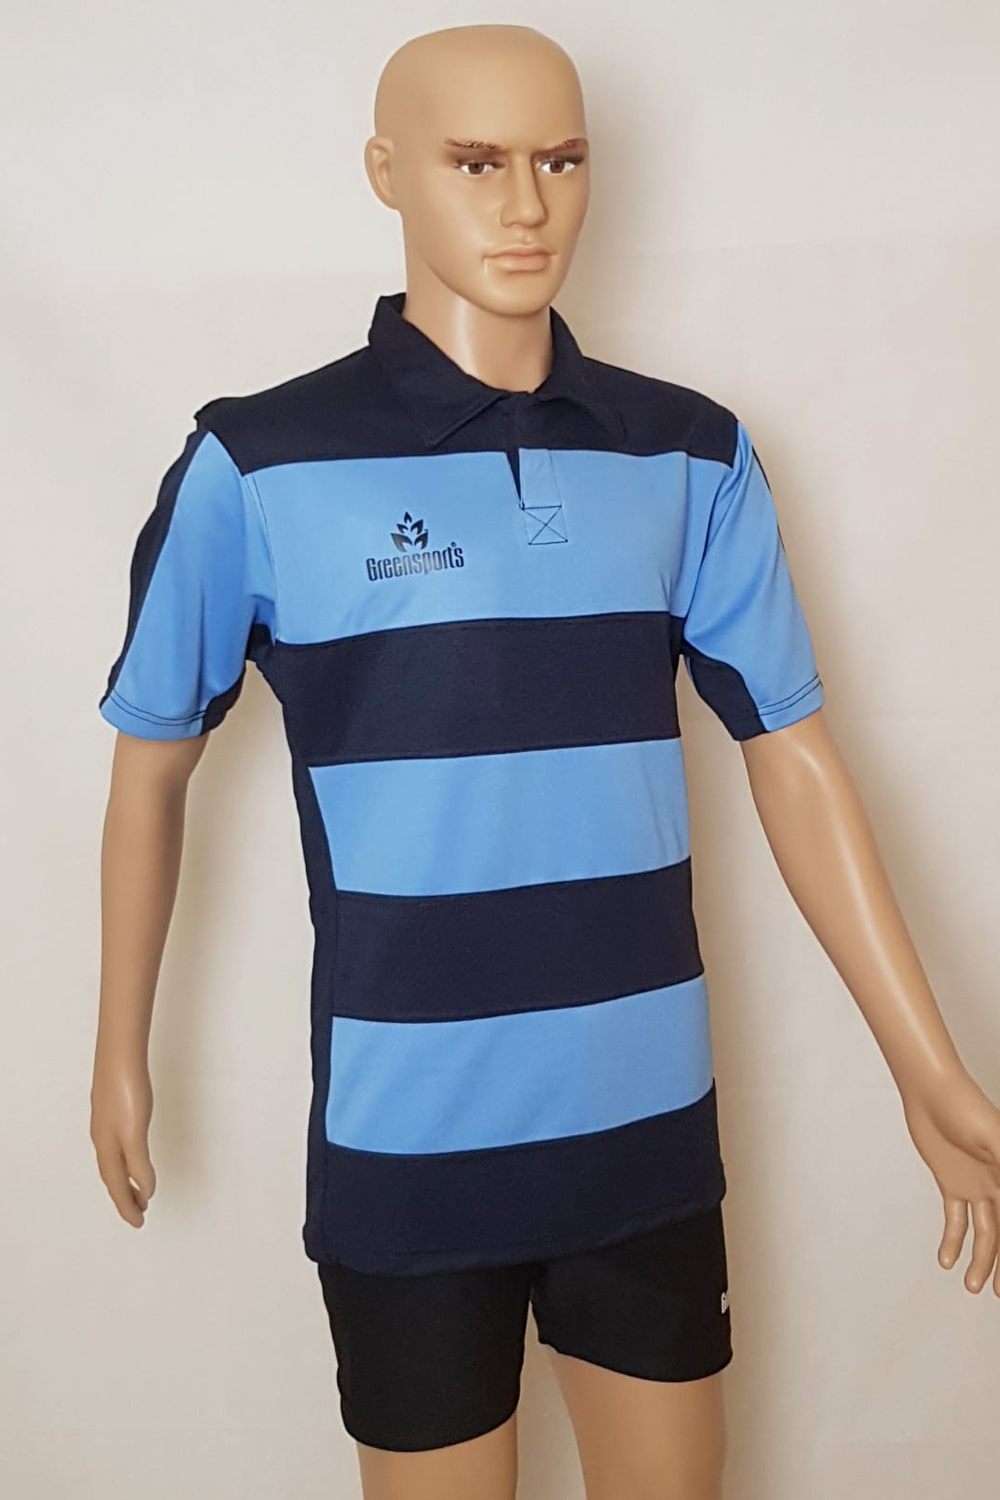 RUGBY JERSEY